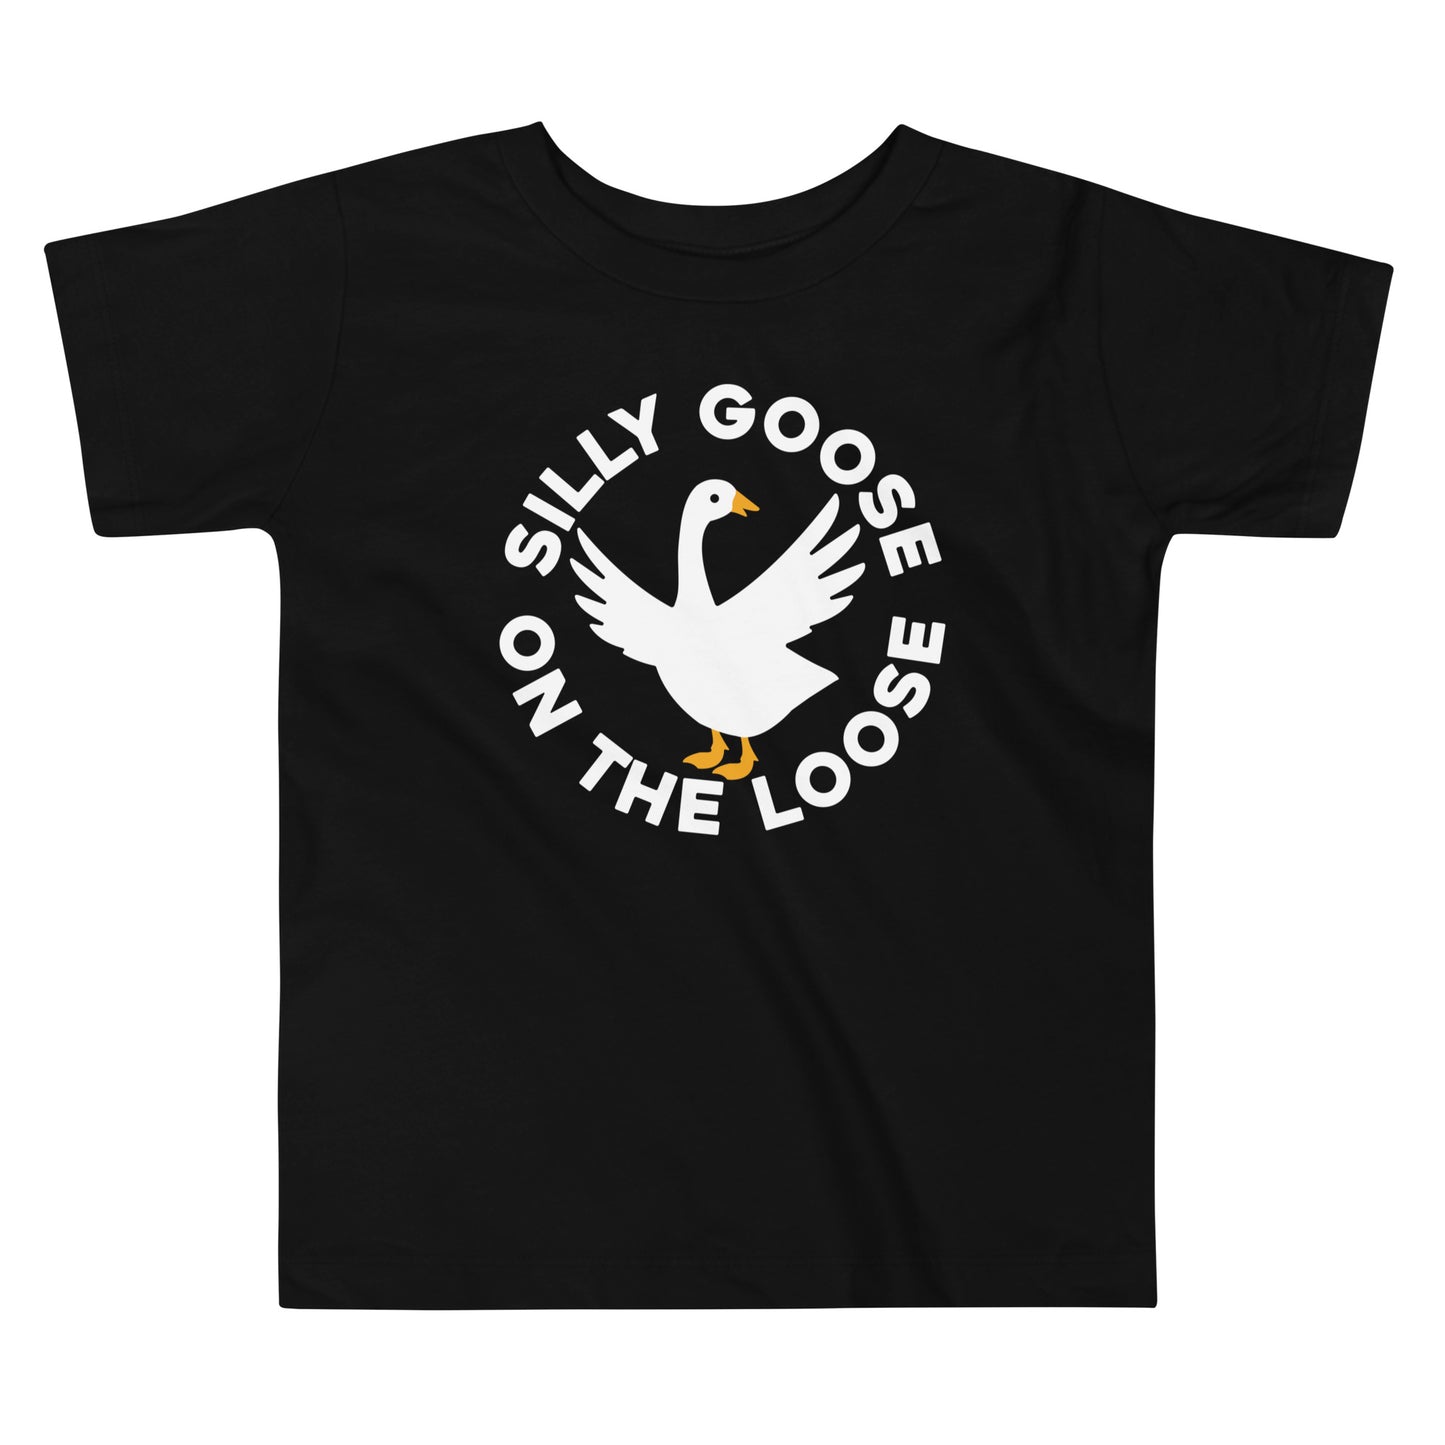 Silly Goose On The Loose Kid's Toddler Tee